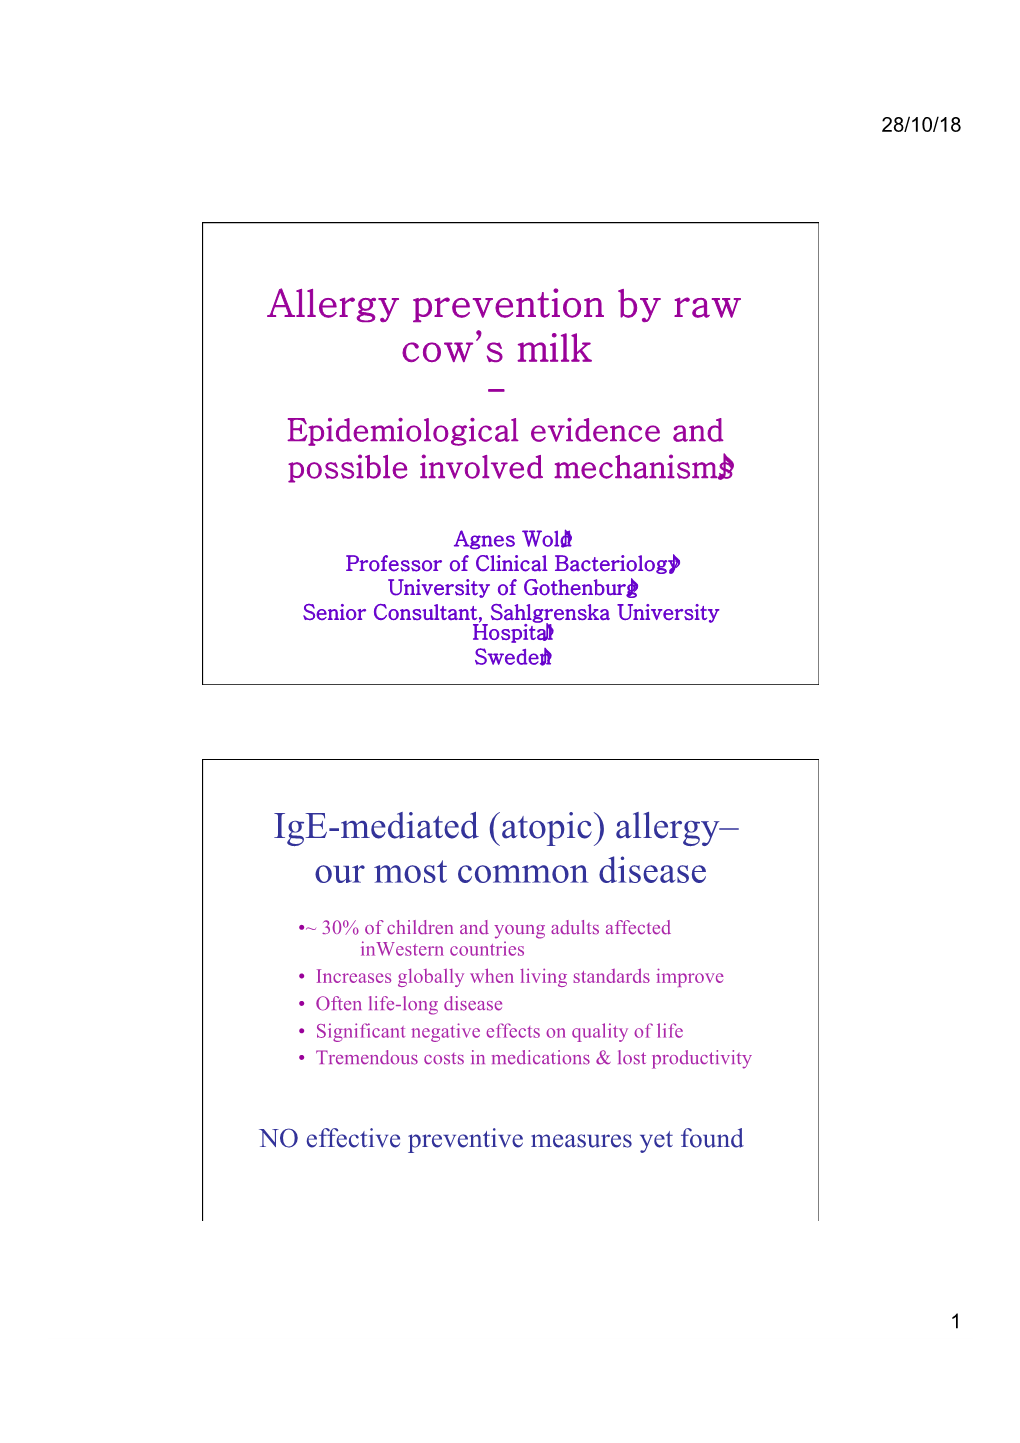 "Allergy Prevention by Raw Cow's Milk